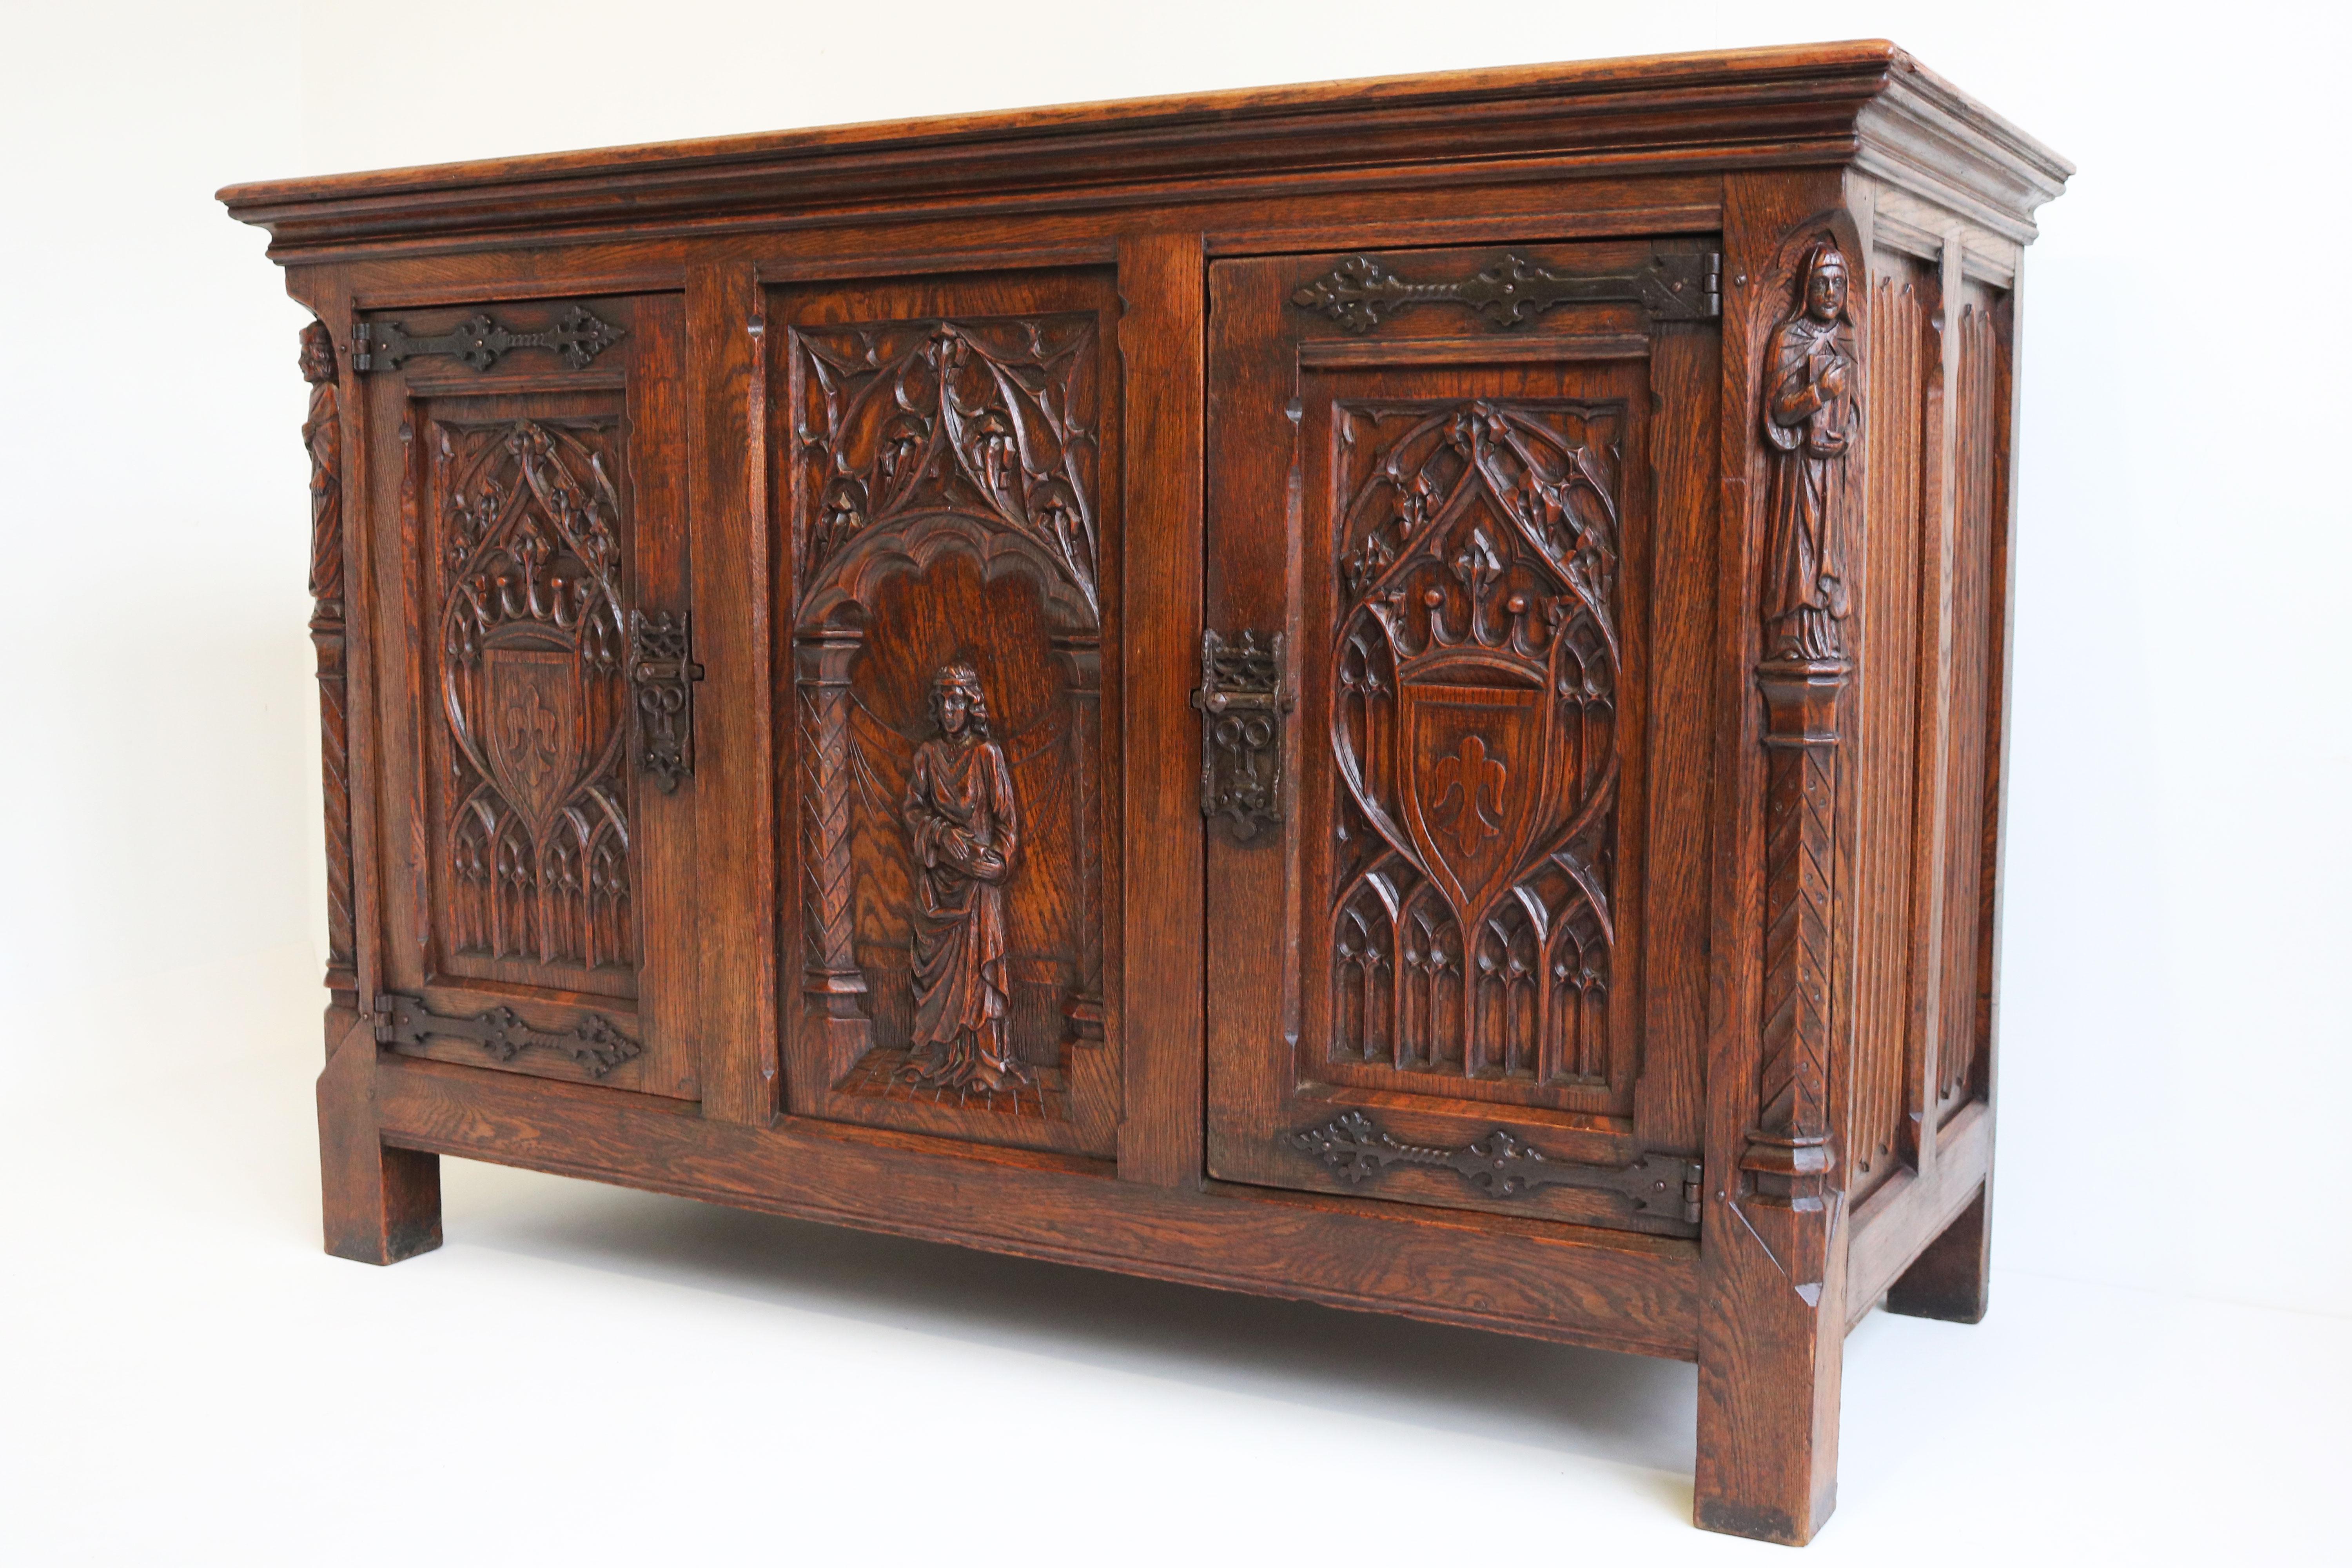 Early 20th Century French Antique Gothic Revival Cabinet / Small Credenza 1920 Carved Figures Oak